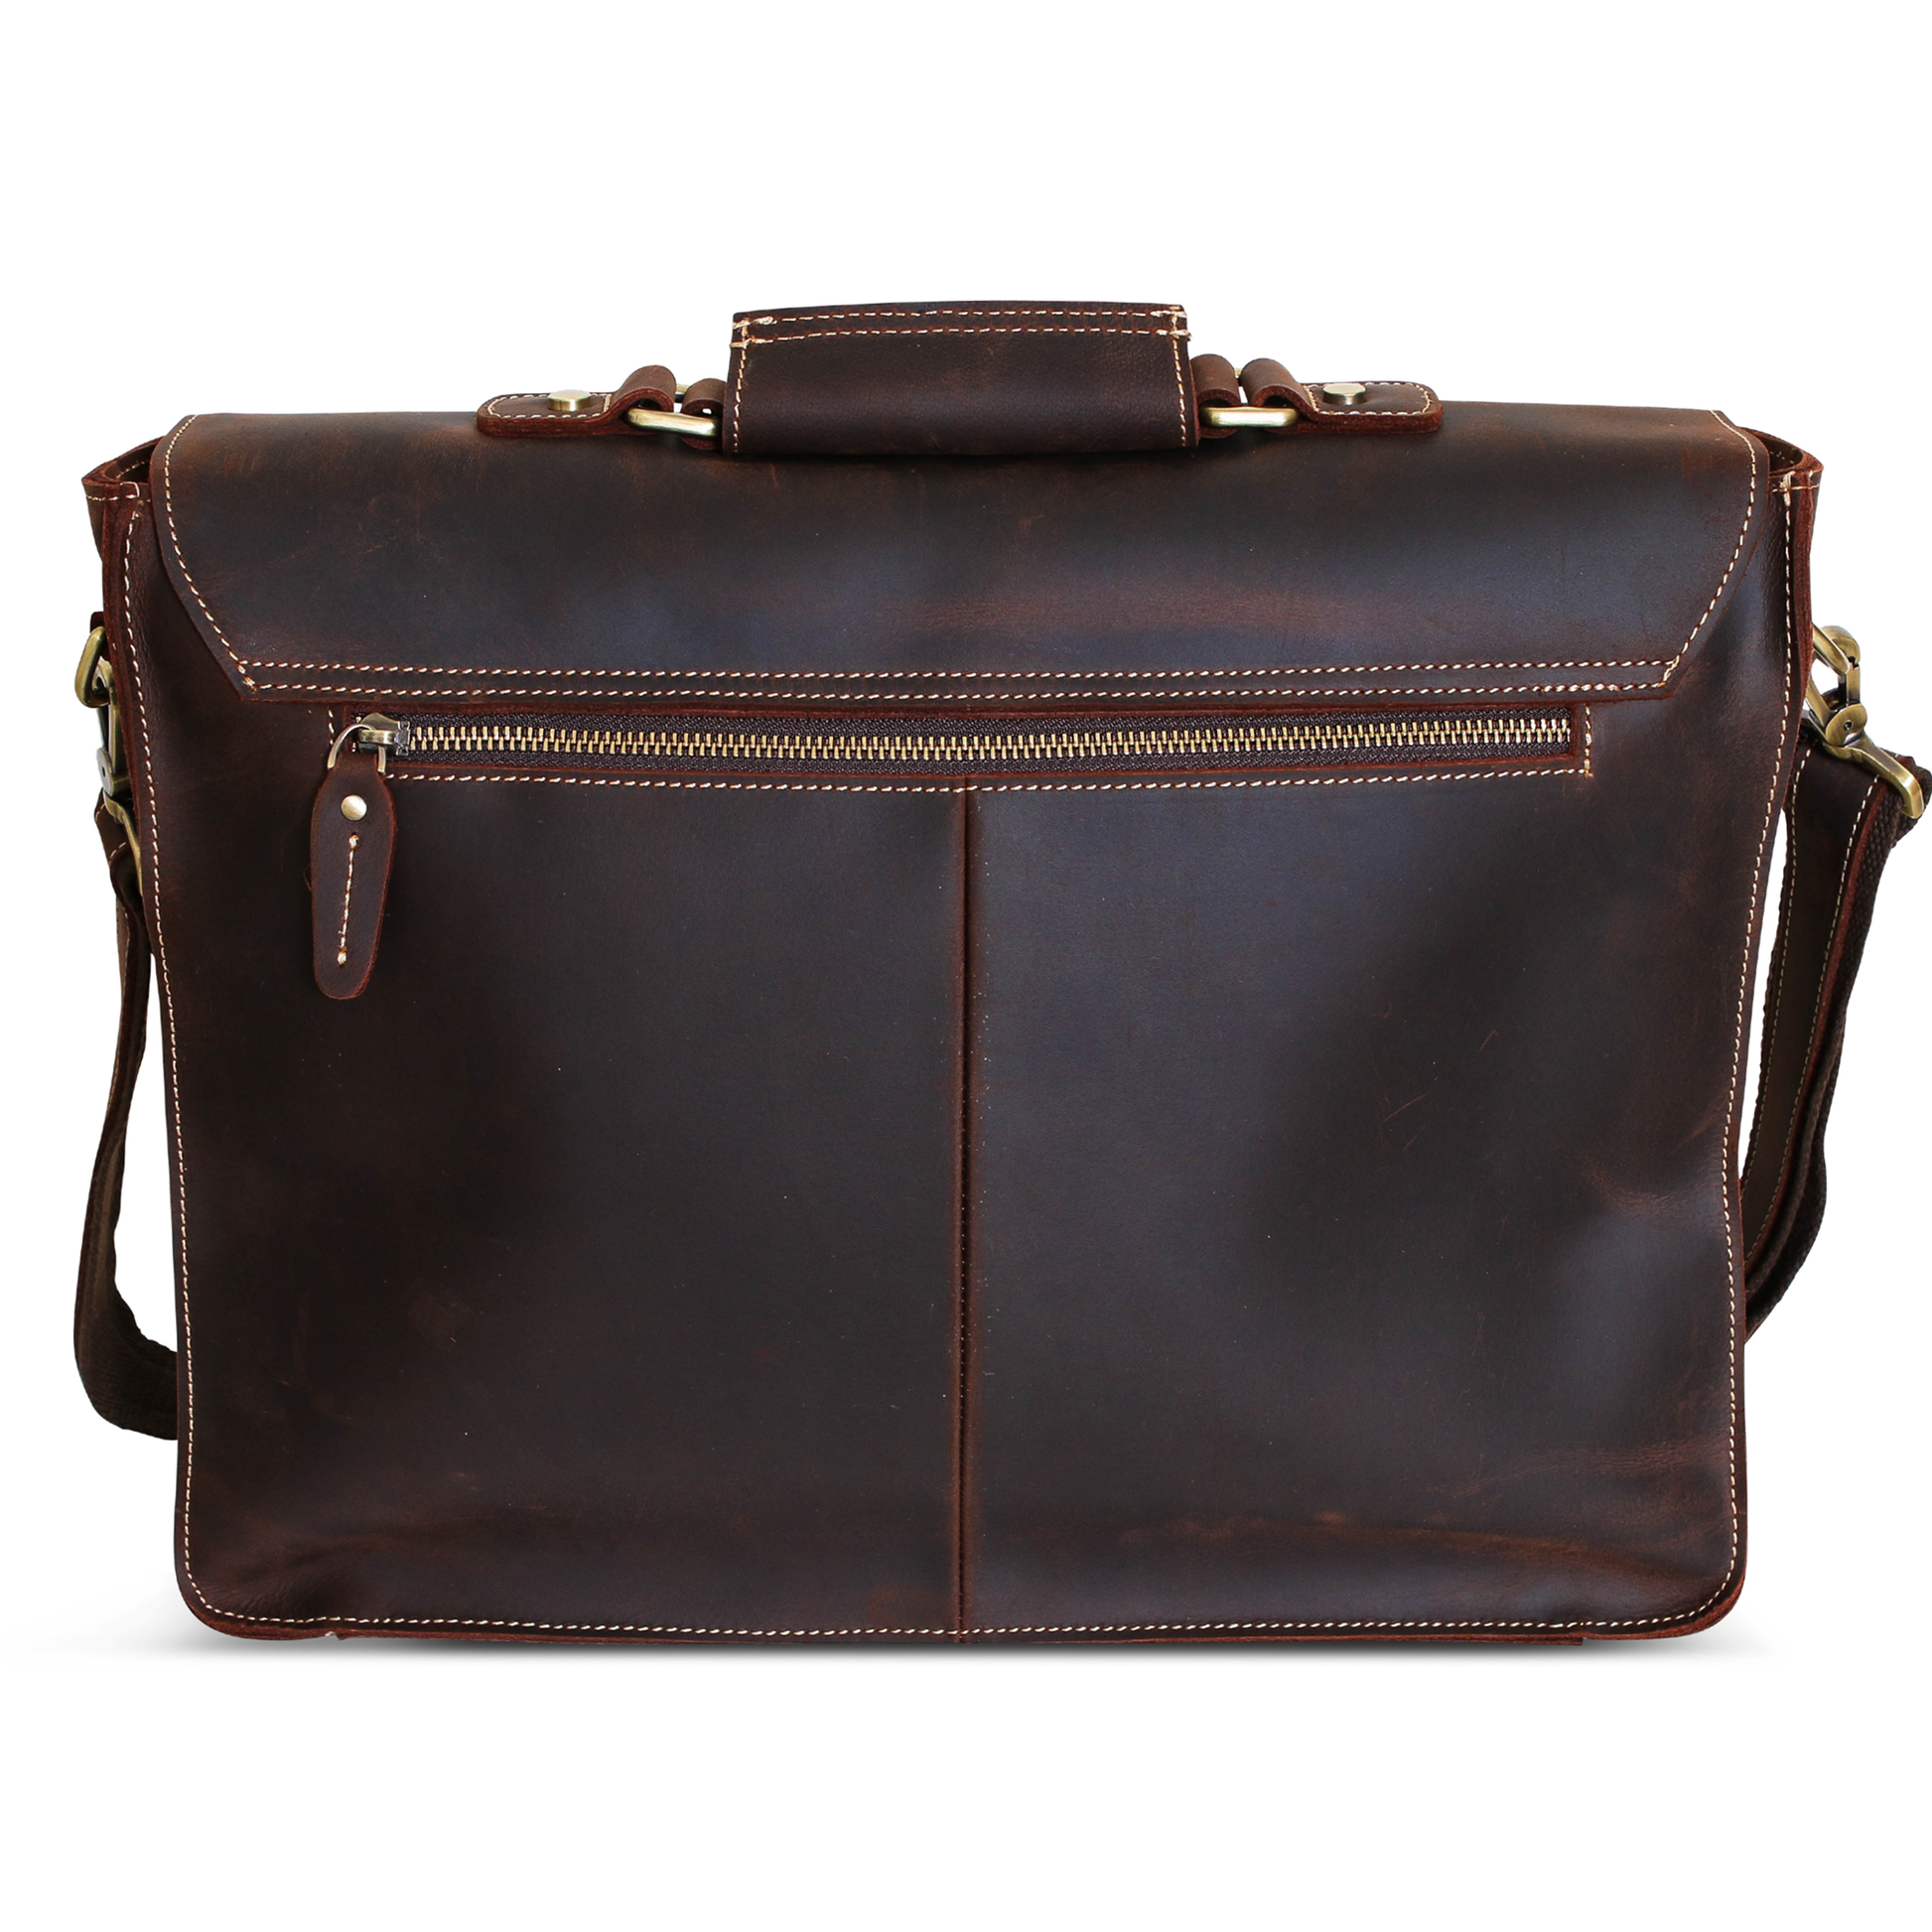 Luxury Leather Business Bag For Men, 25 Year Warranty